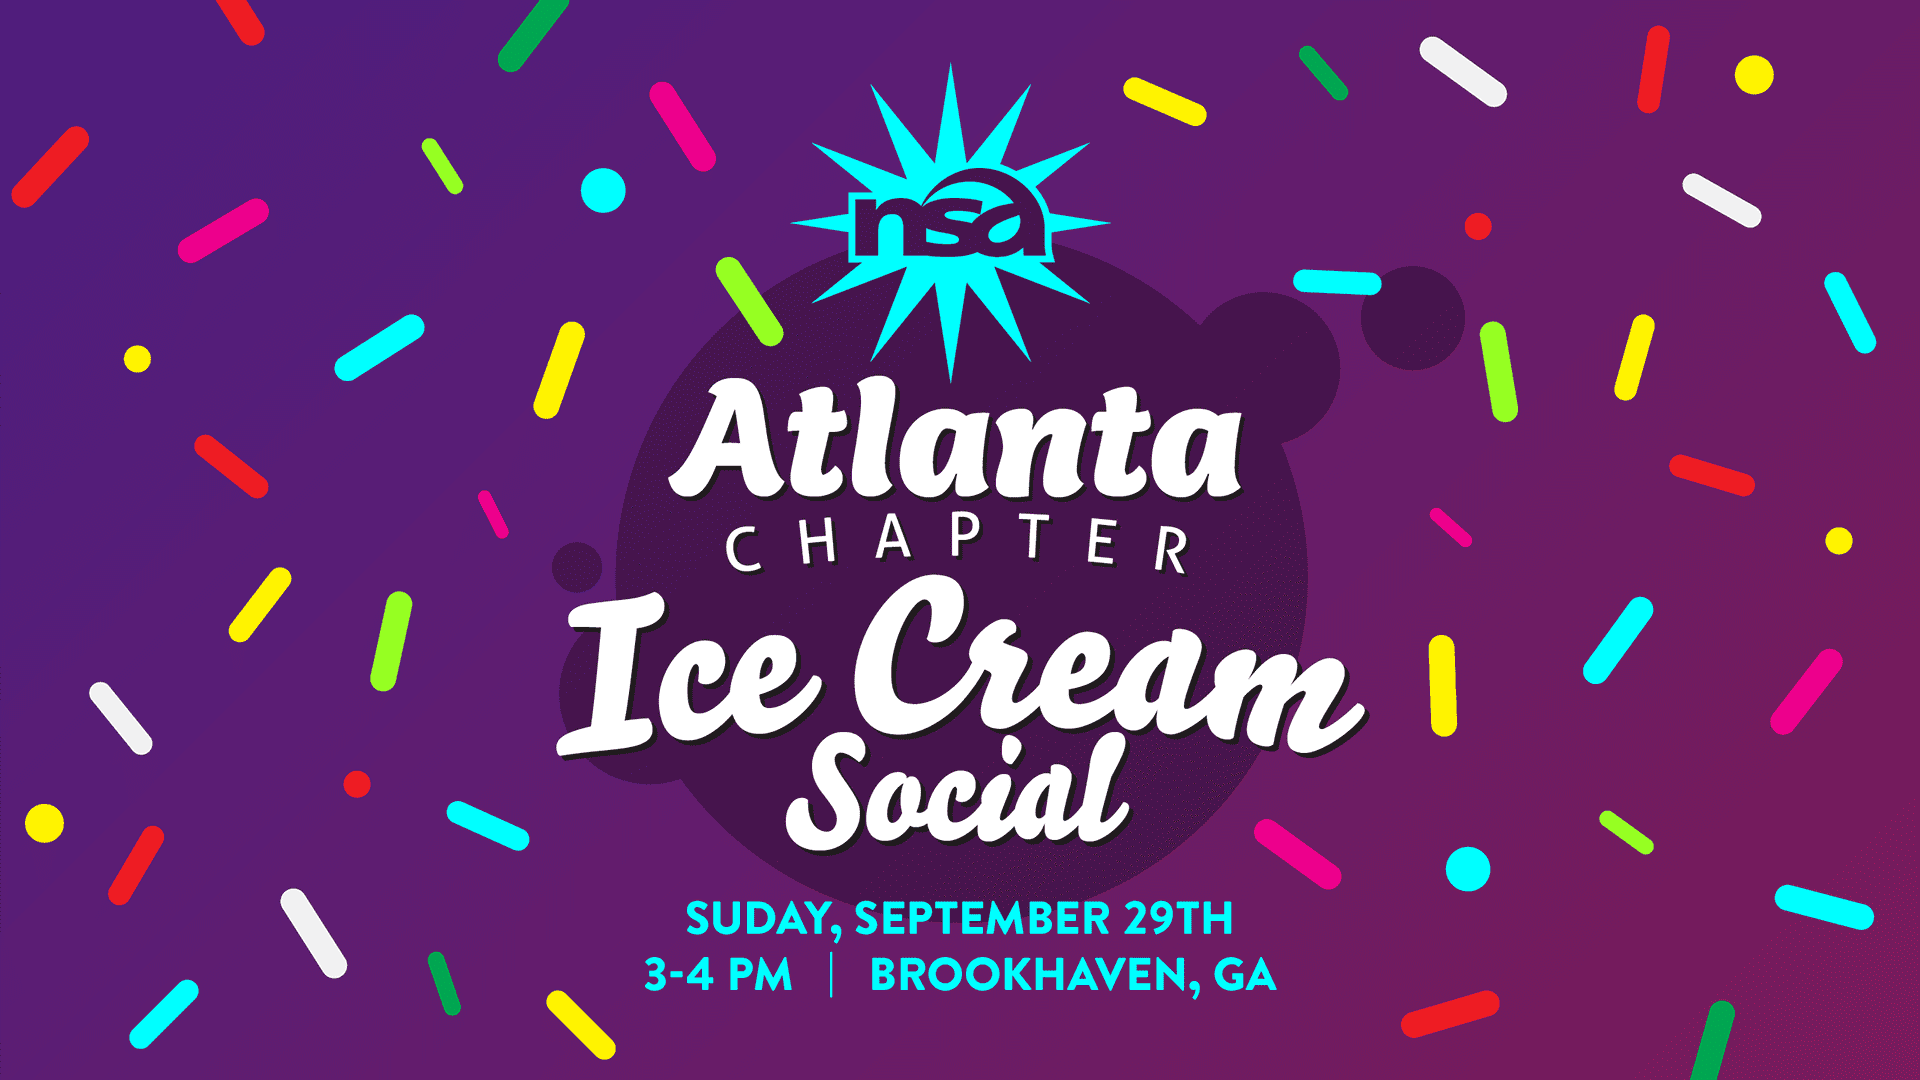 A colorful flyer for the Atlanta Chapter Ice Cream Social hosted by the NSA. The event is on Sunday, September 29th, from 3-4 PM, in Brookhaven, GA. The flyer has playful sprinkles and a vibrant gradient background.